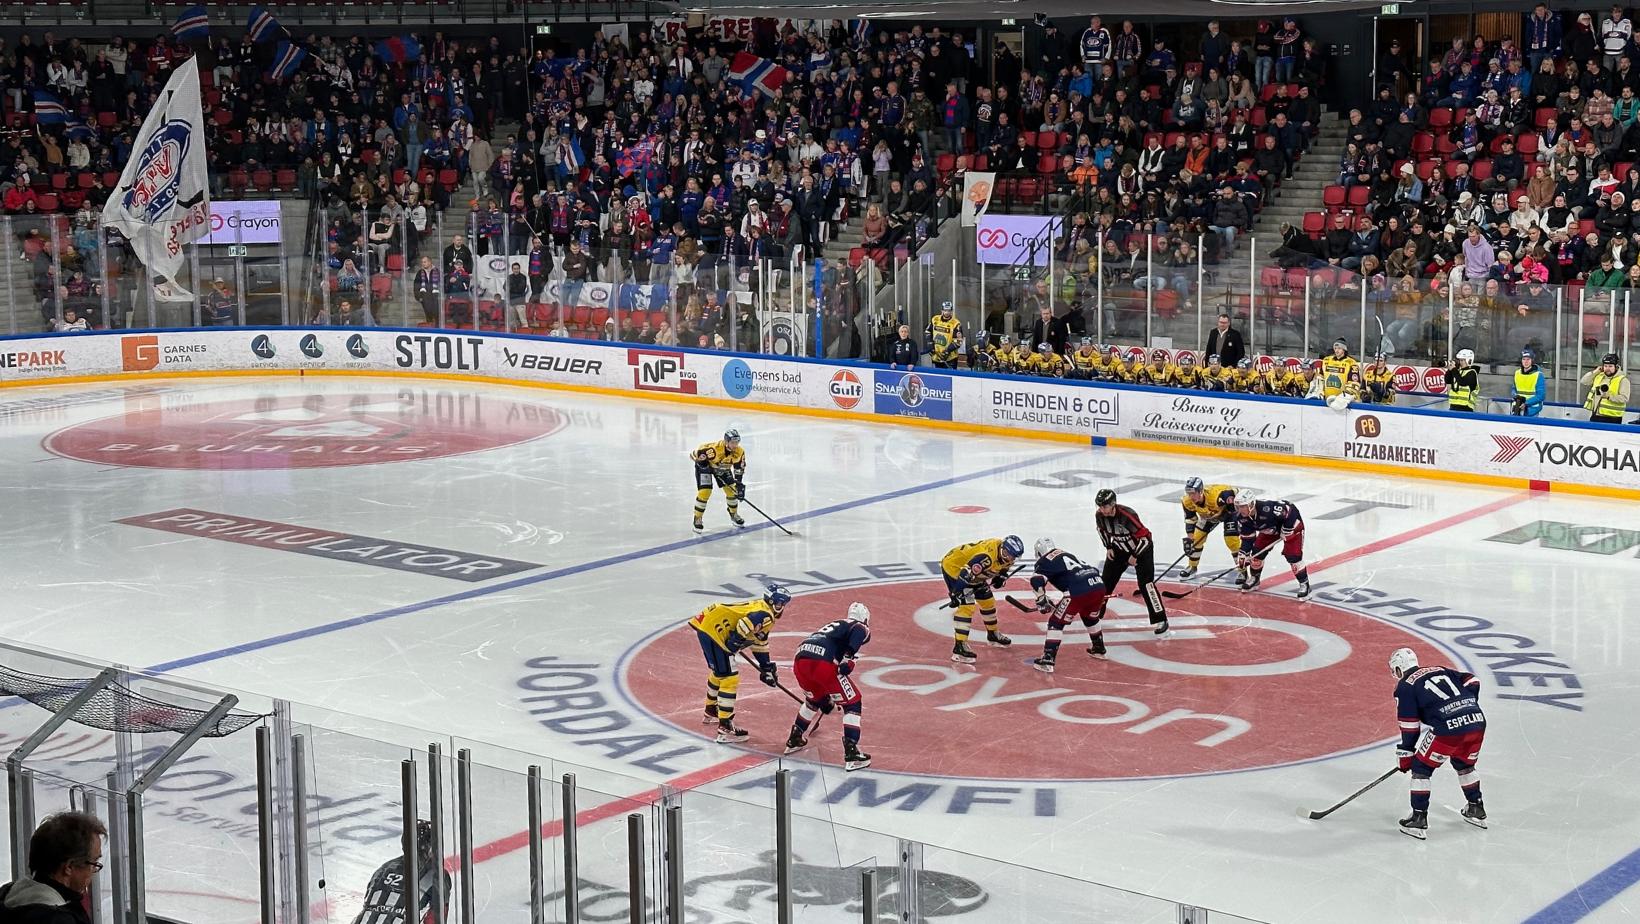 Ice hockey match in Norway.